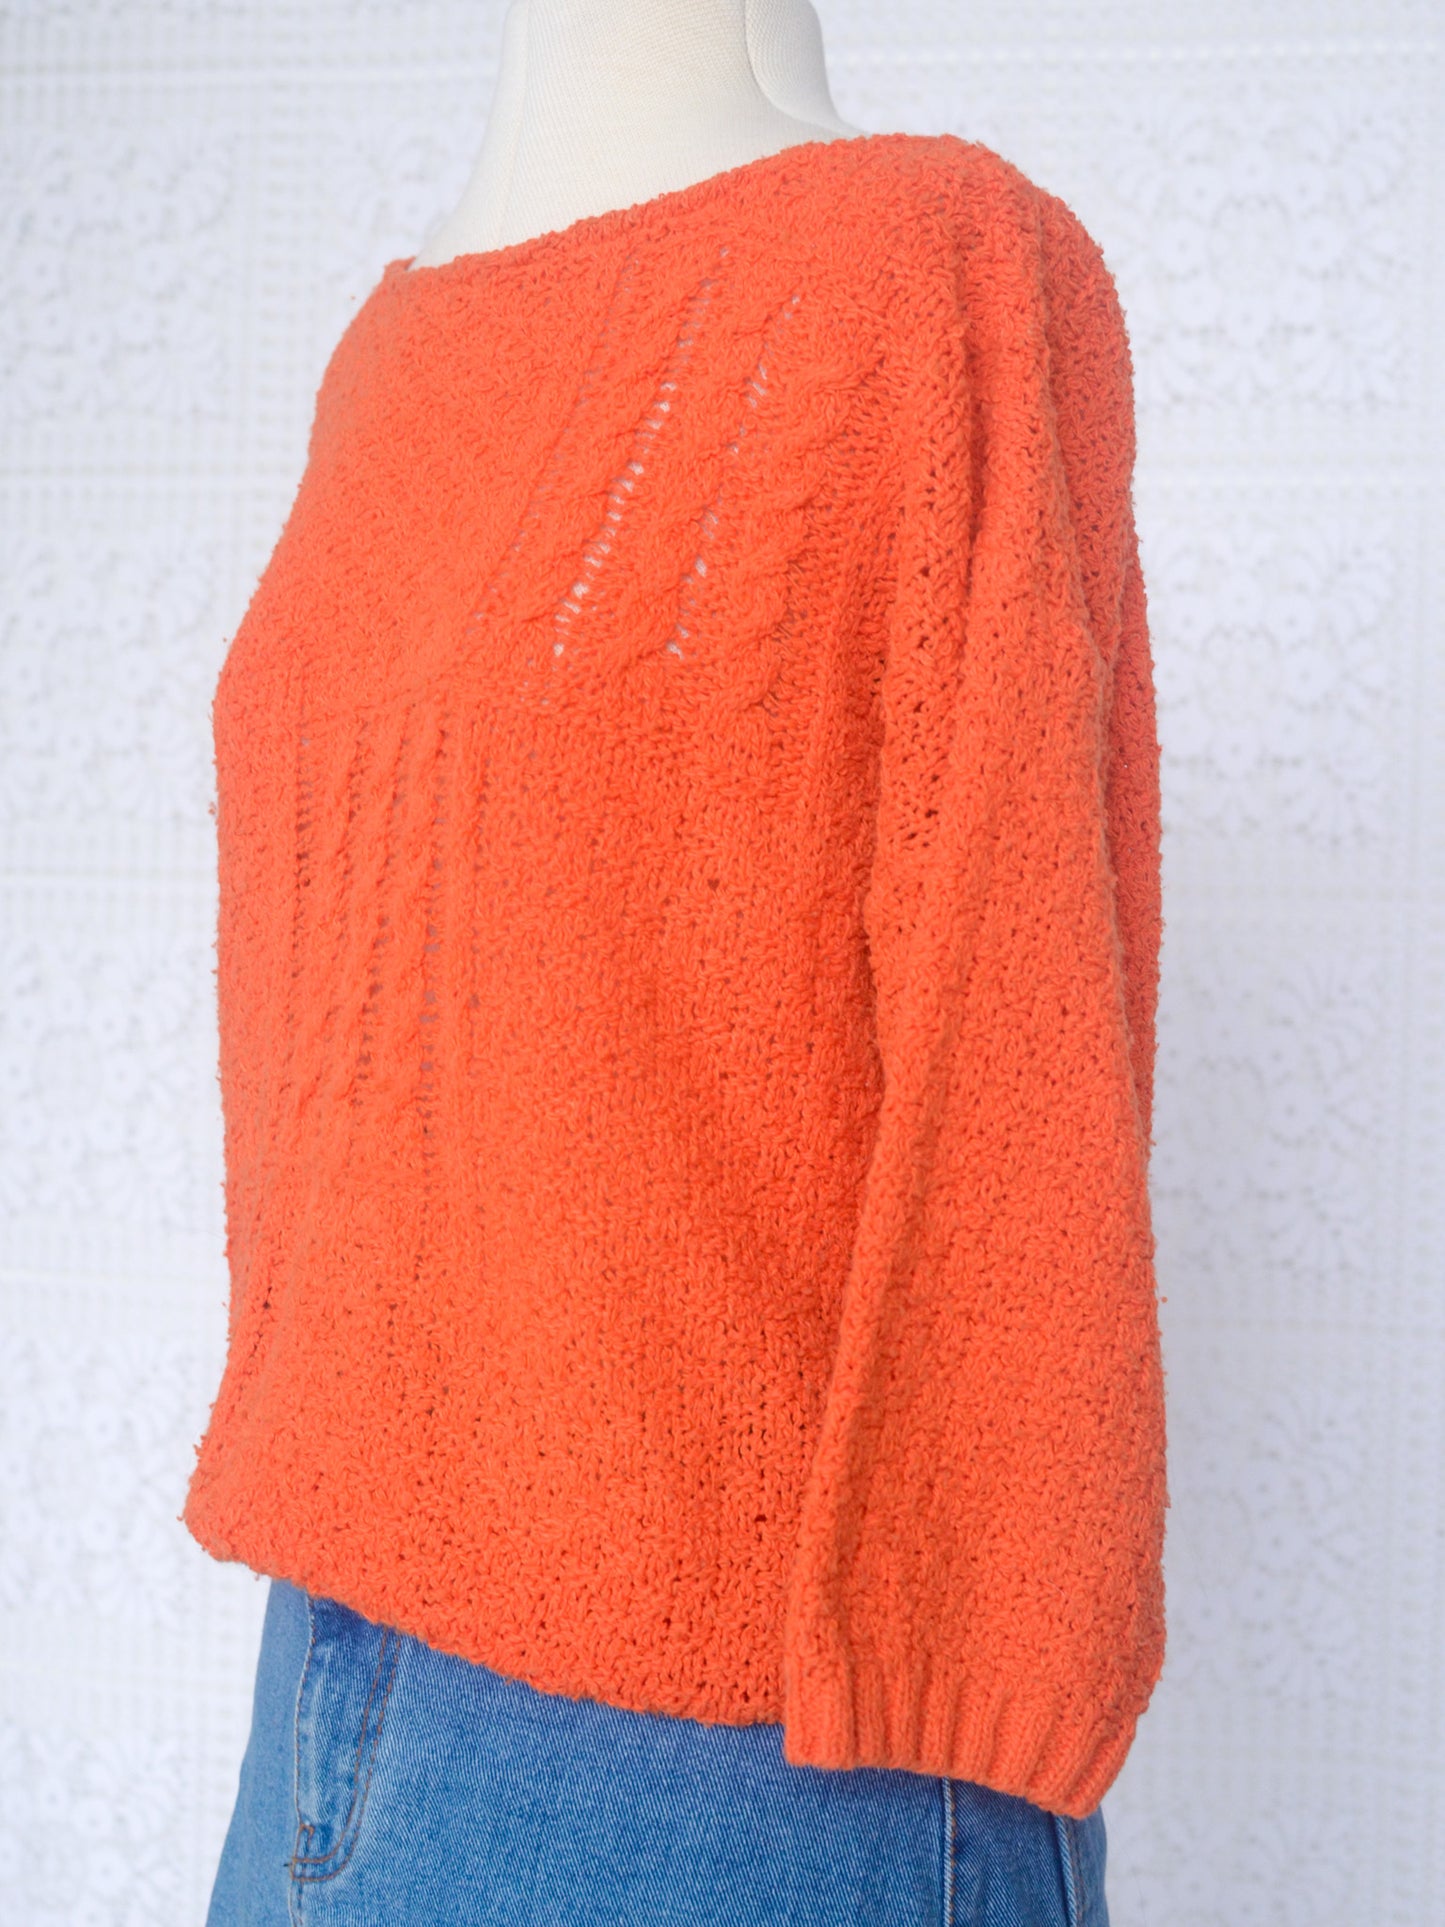 1980s British Home Stores orange 3/4 length sleeve knitted jumper